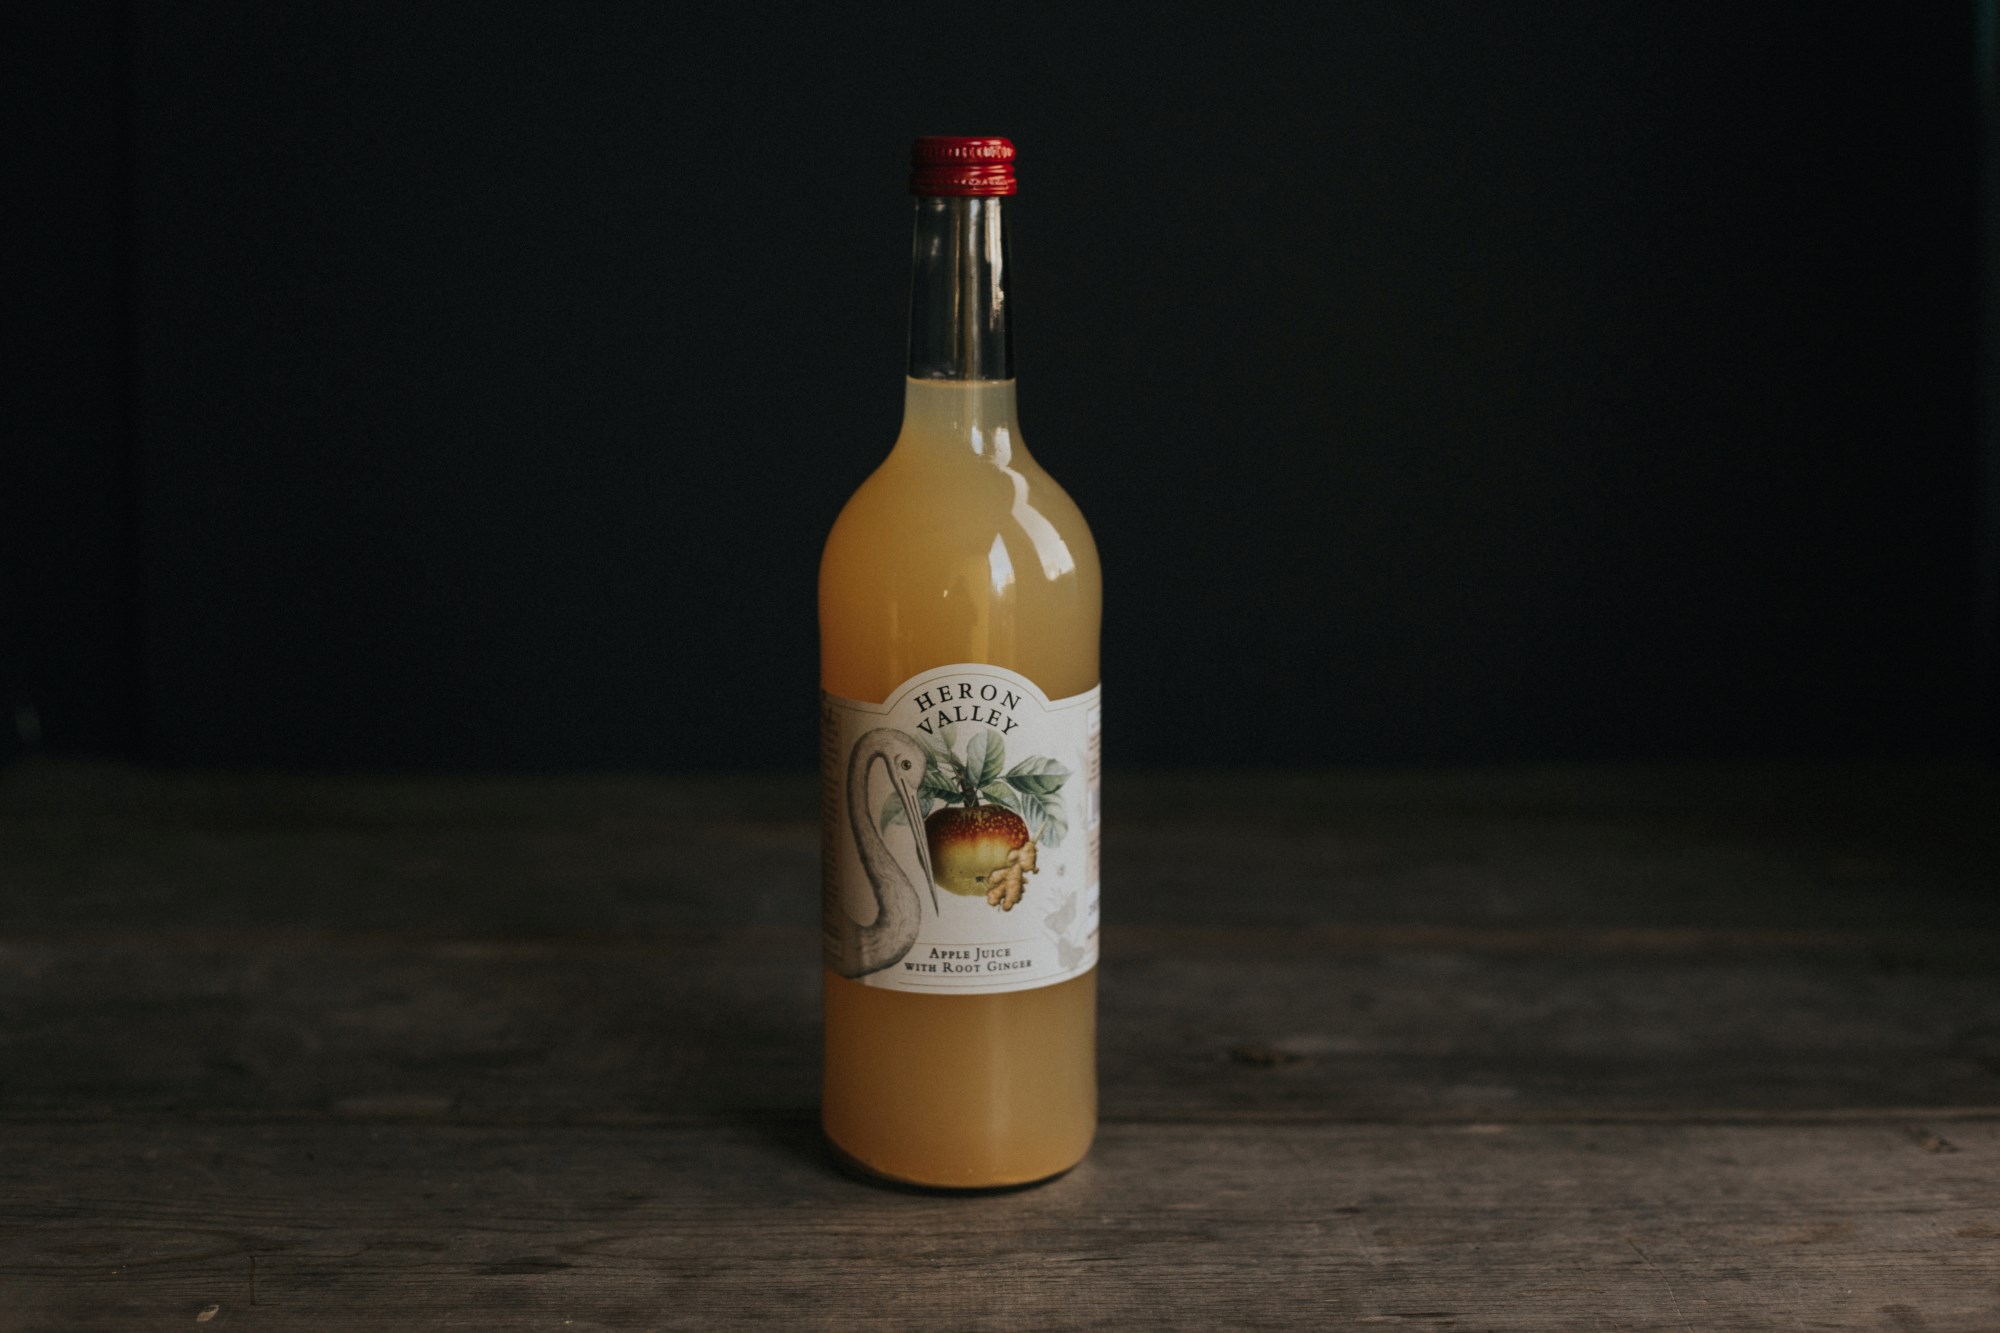 Heron Valley Apple Juice with Root Ginger - 750ml